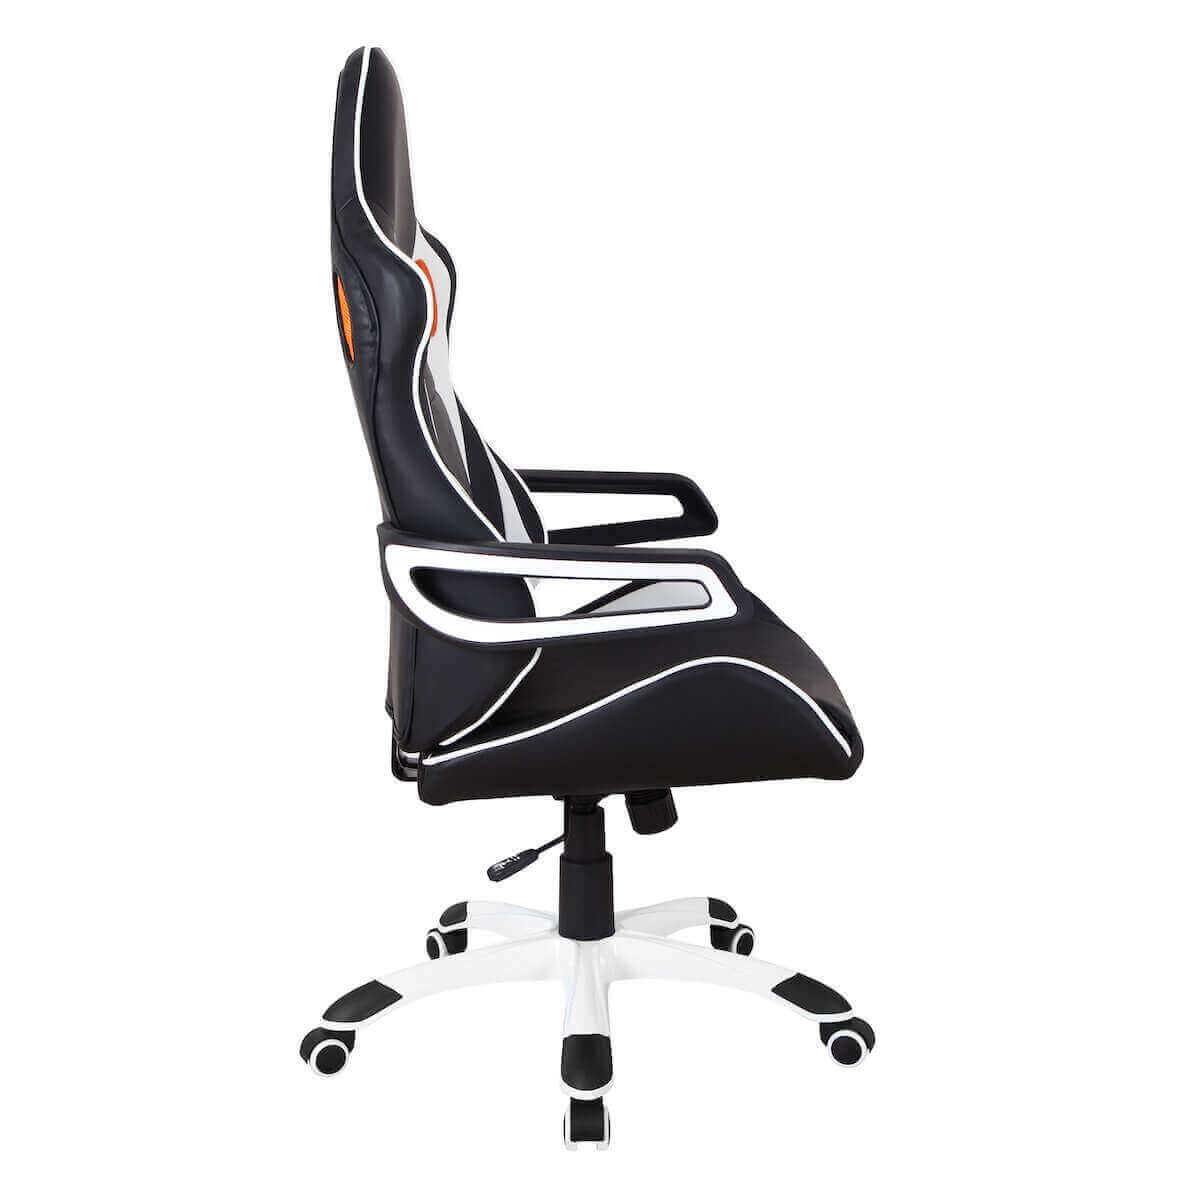 Techni Mobili Black Racing Style Home & Office Chair RTA-2022-BK Side